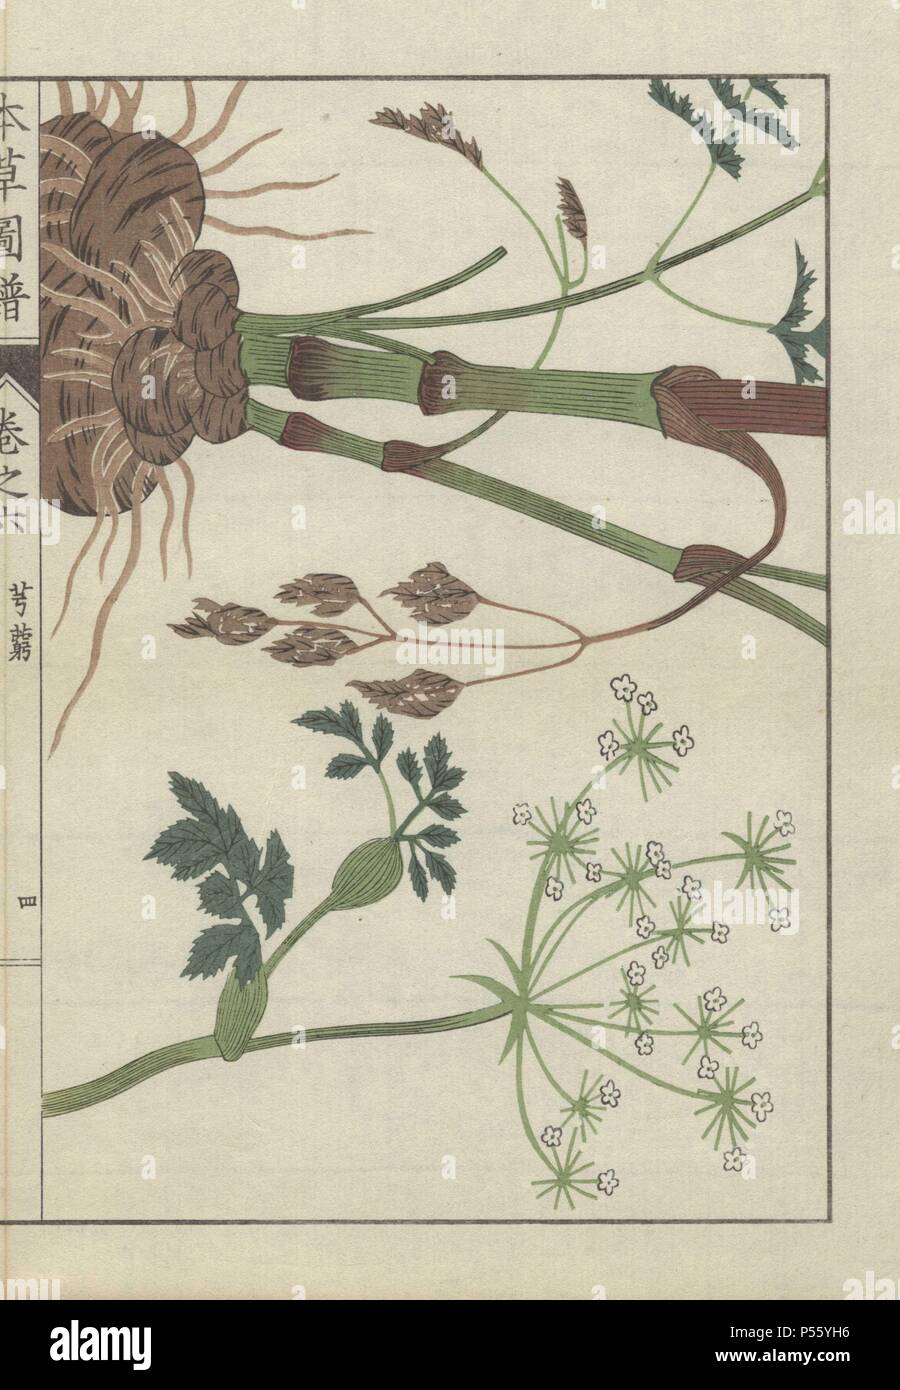 Snowparsley or cnidium plant. Cnidium officinale. Senkyou. . Colour-printed woodblock engraving by Kan'en Iwasaki from 'Honzo Zufu,' an Illustrated Guide to Medicinal Plants, 1884. Iwasaki (1786-1842) was a Japanese botanist, entomologist and zoologist. He was one of the first Japanese botanists to incorporate western knowledge into his studies. Stock Photo